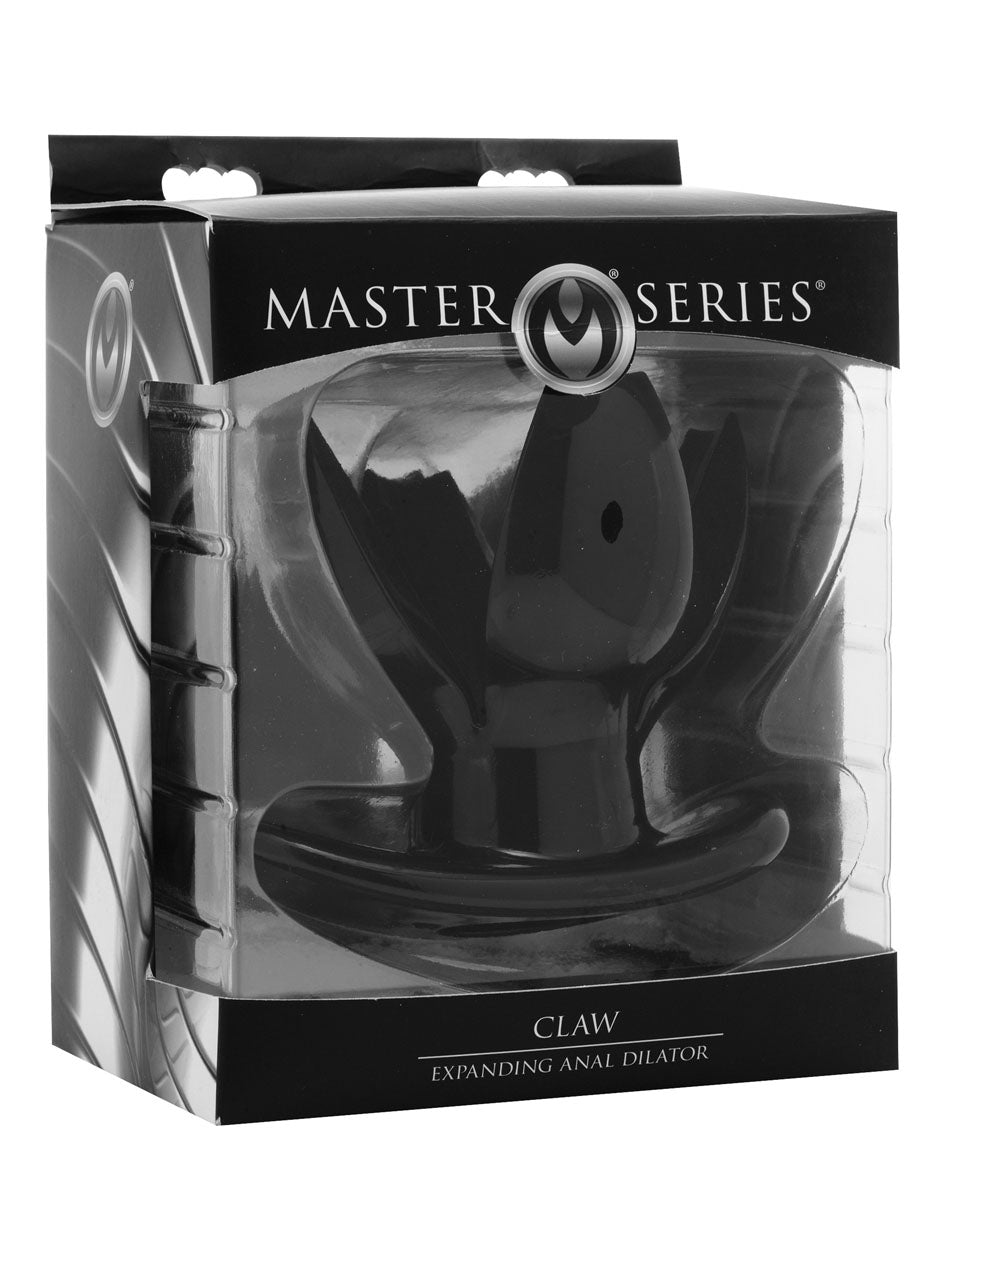 Master Series Claw Expanding Anal Dilator